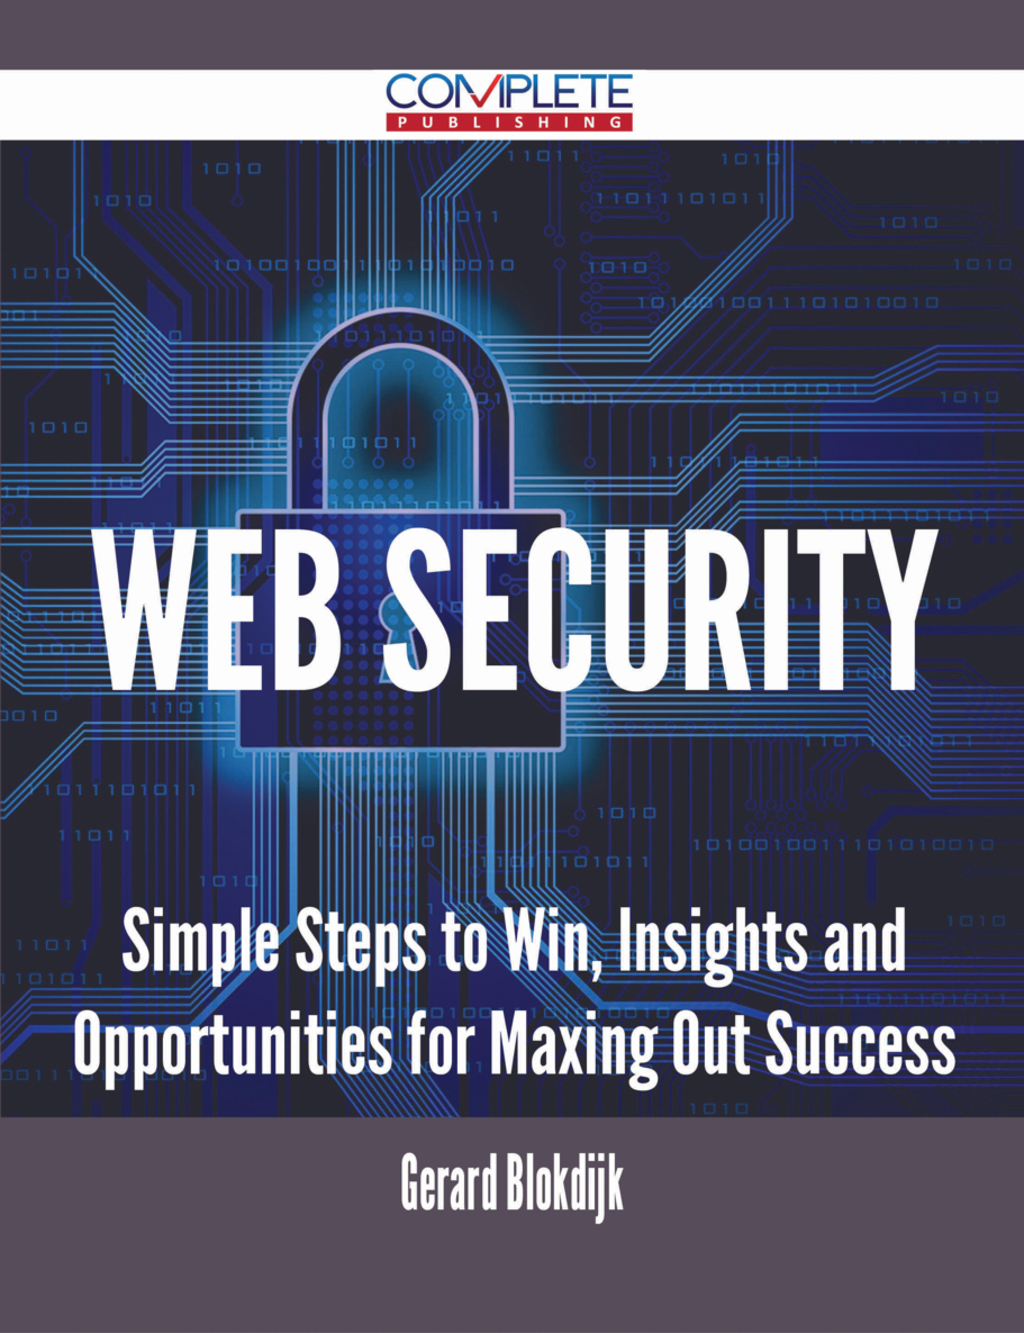 ISBN 9781488896255 product image for Web Security - Simple Steps to Win  Insights and Opportunities for Maxing Out Su | upcitemdb.com